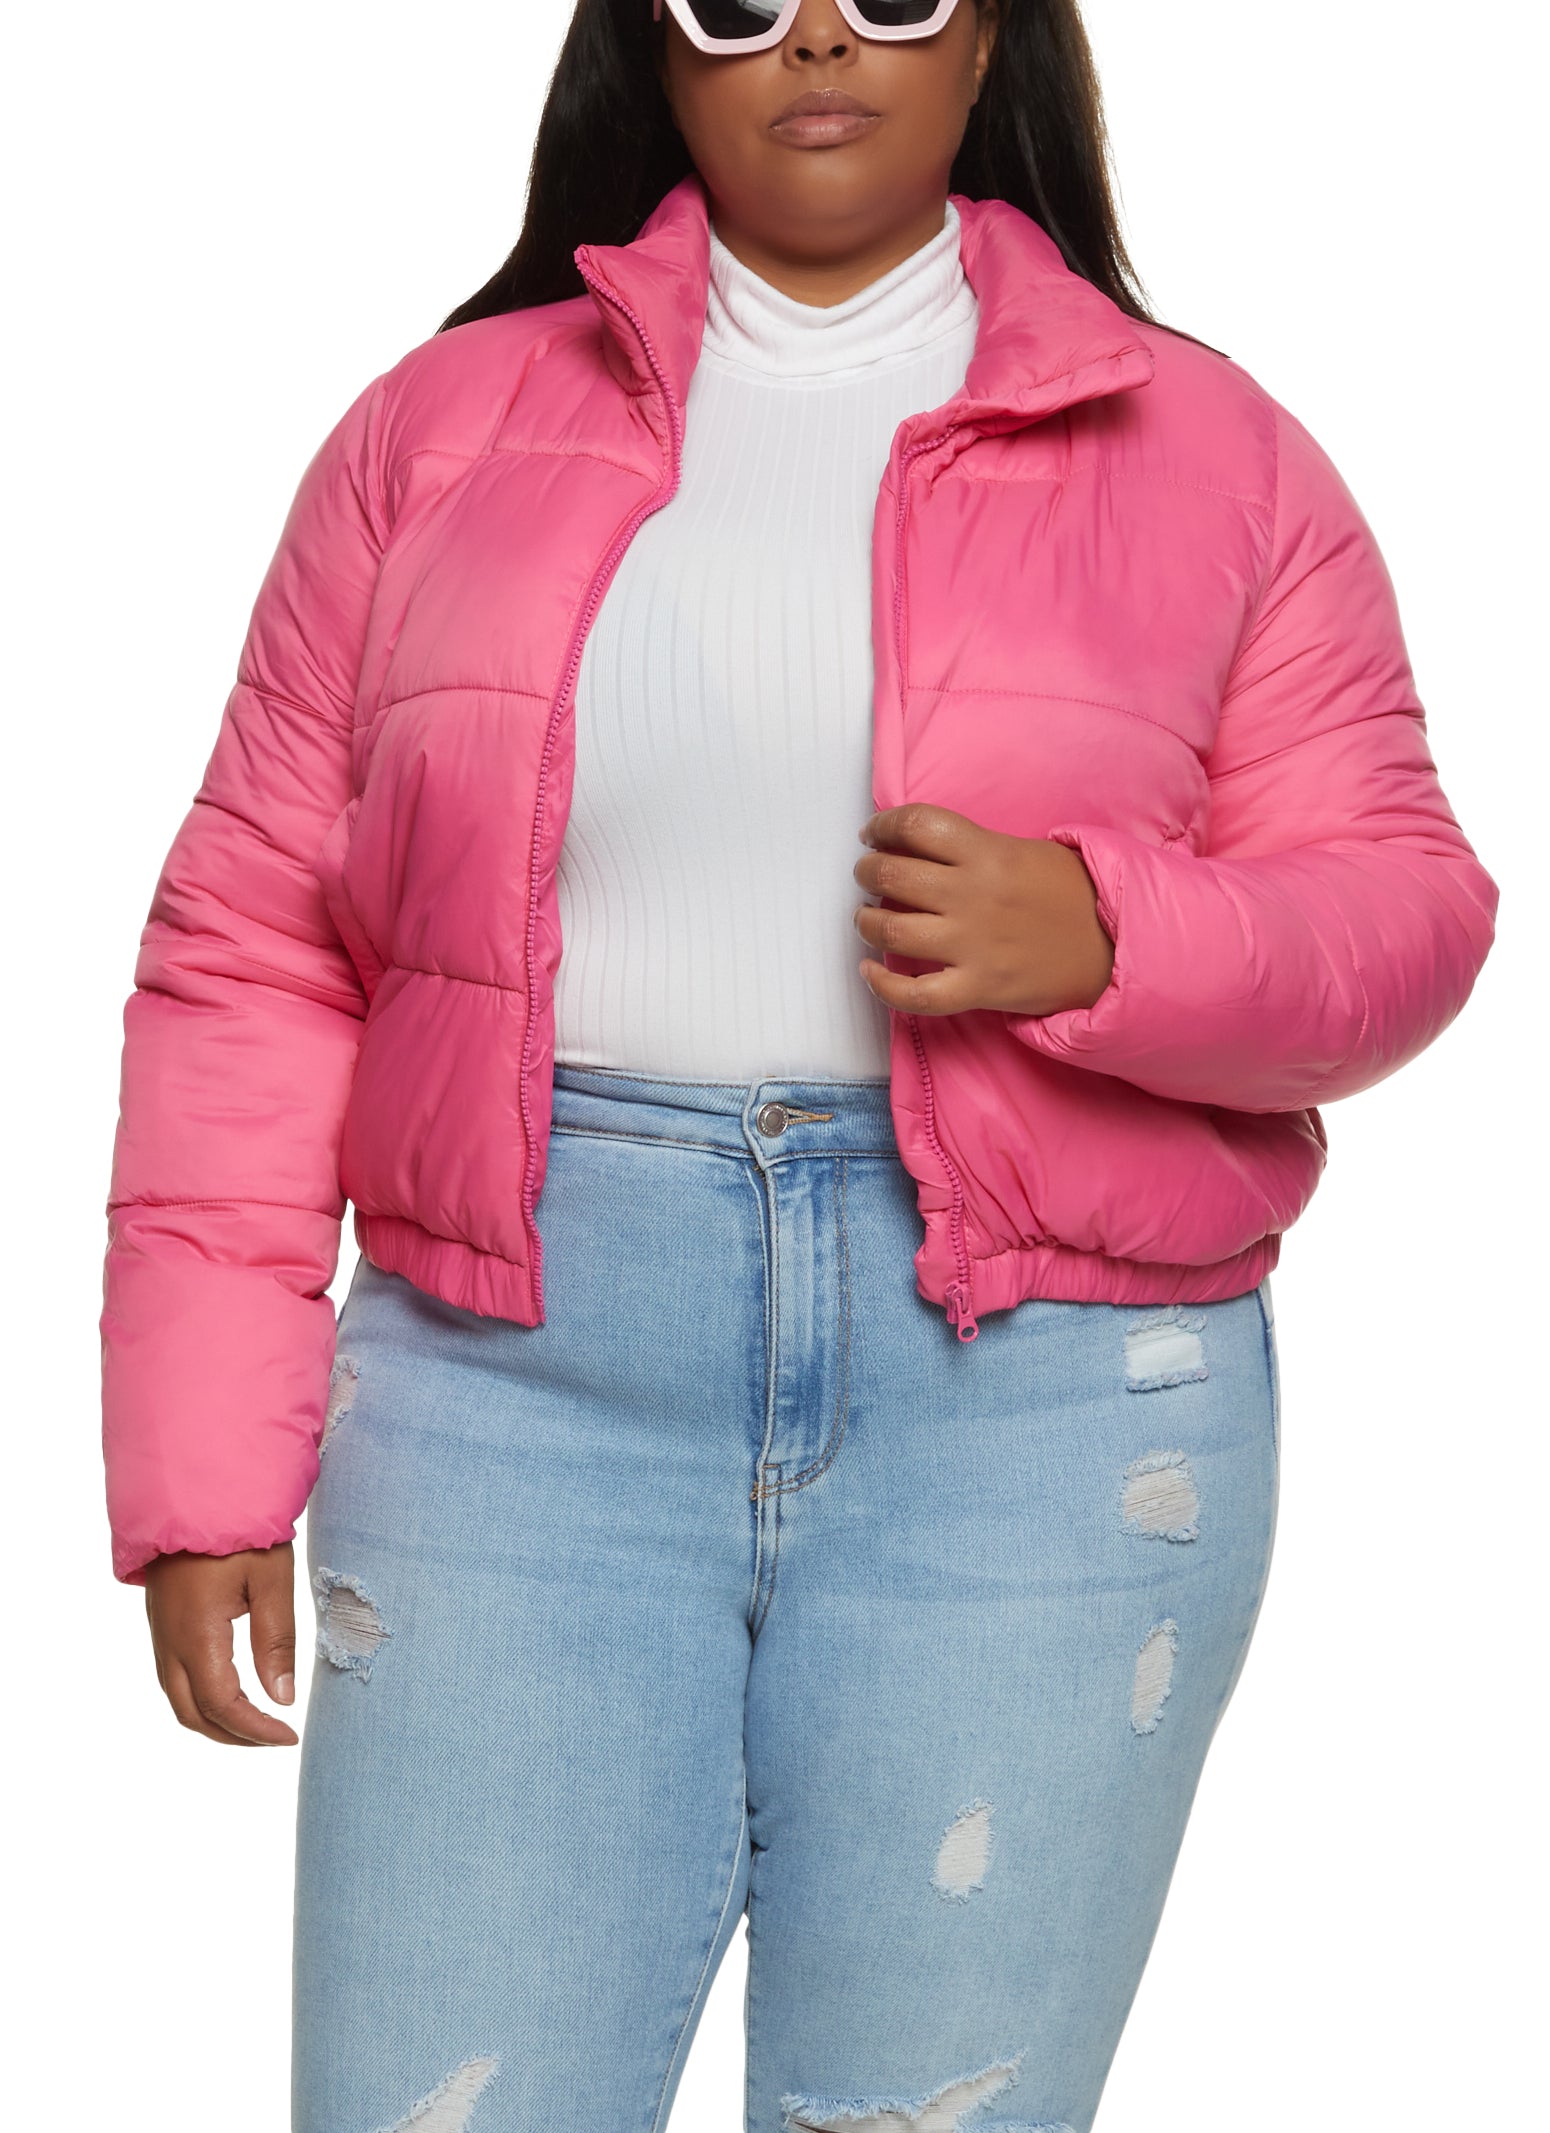 February Colorplay: A Week of Pink and Purple Outfits. Plus size